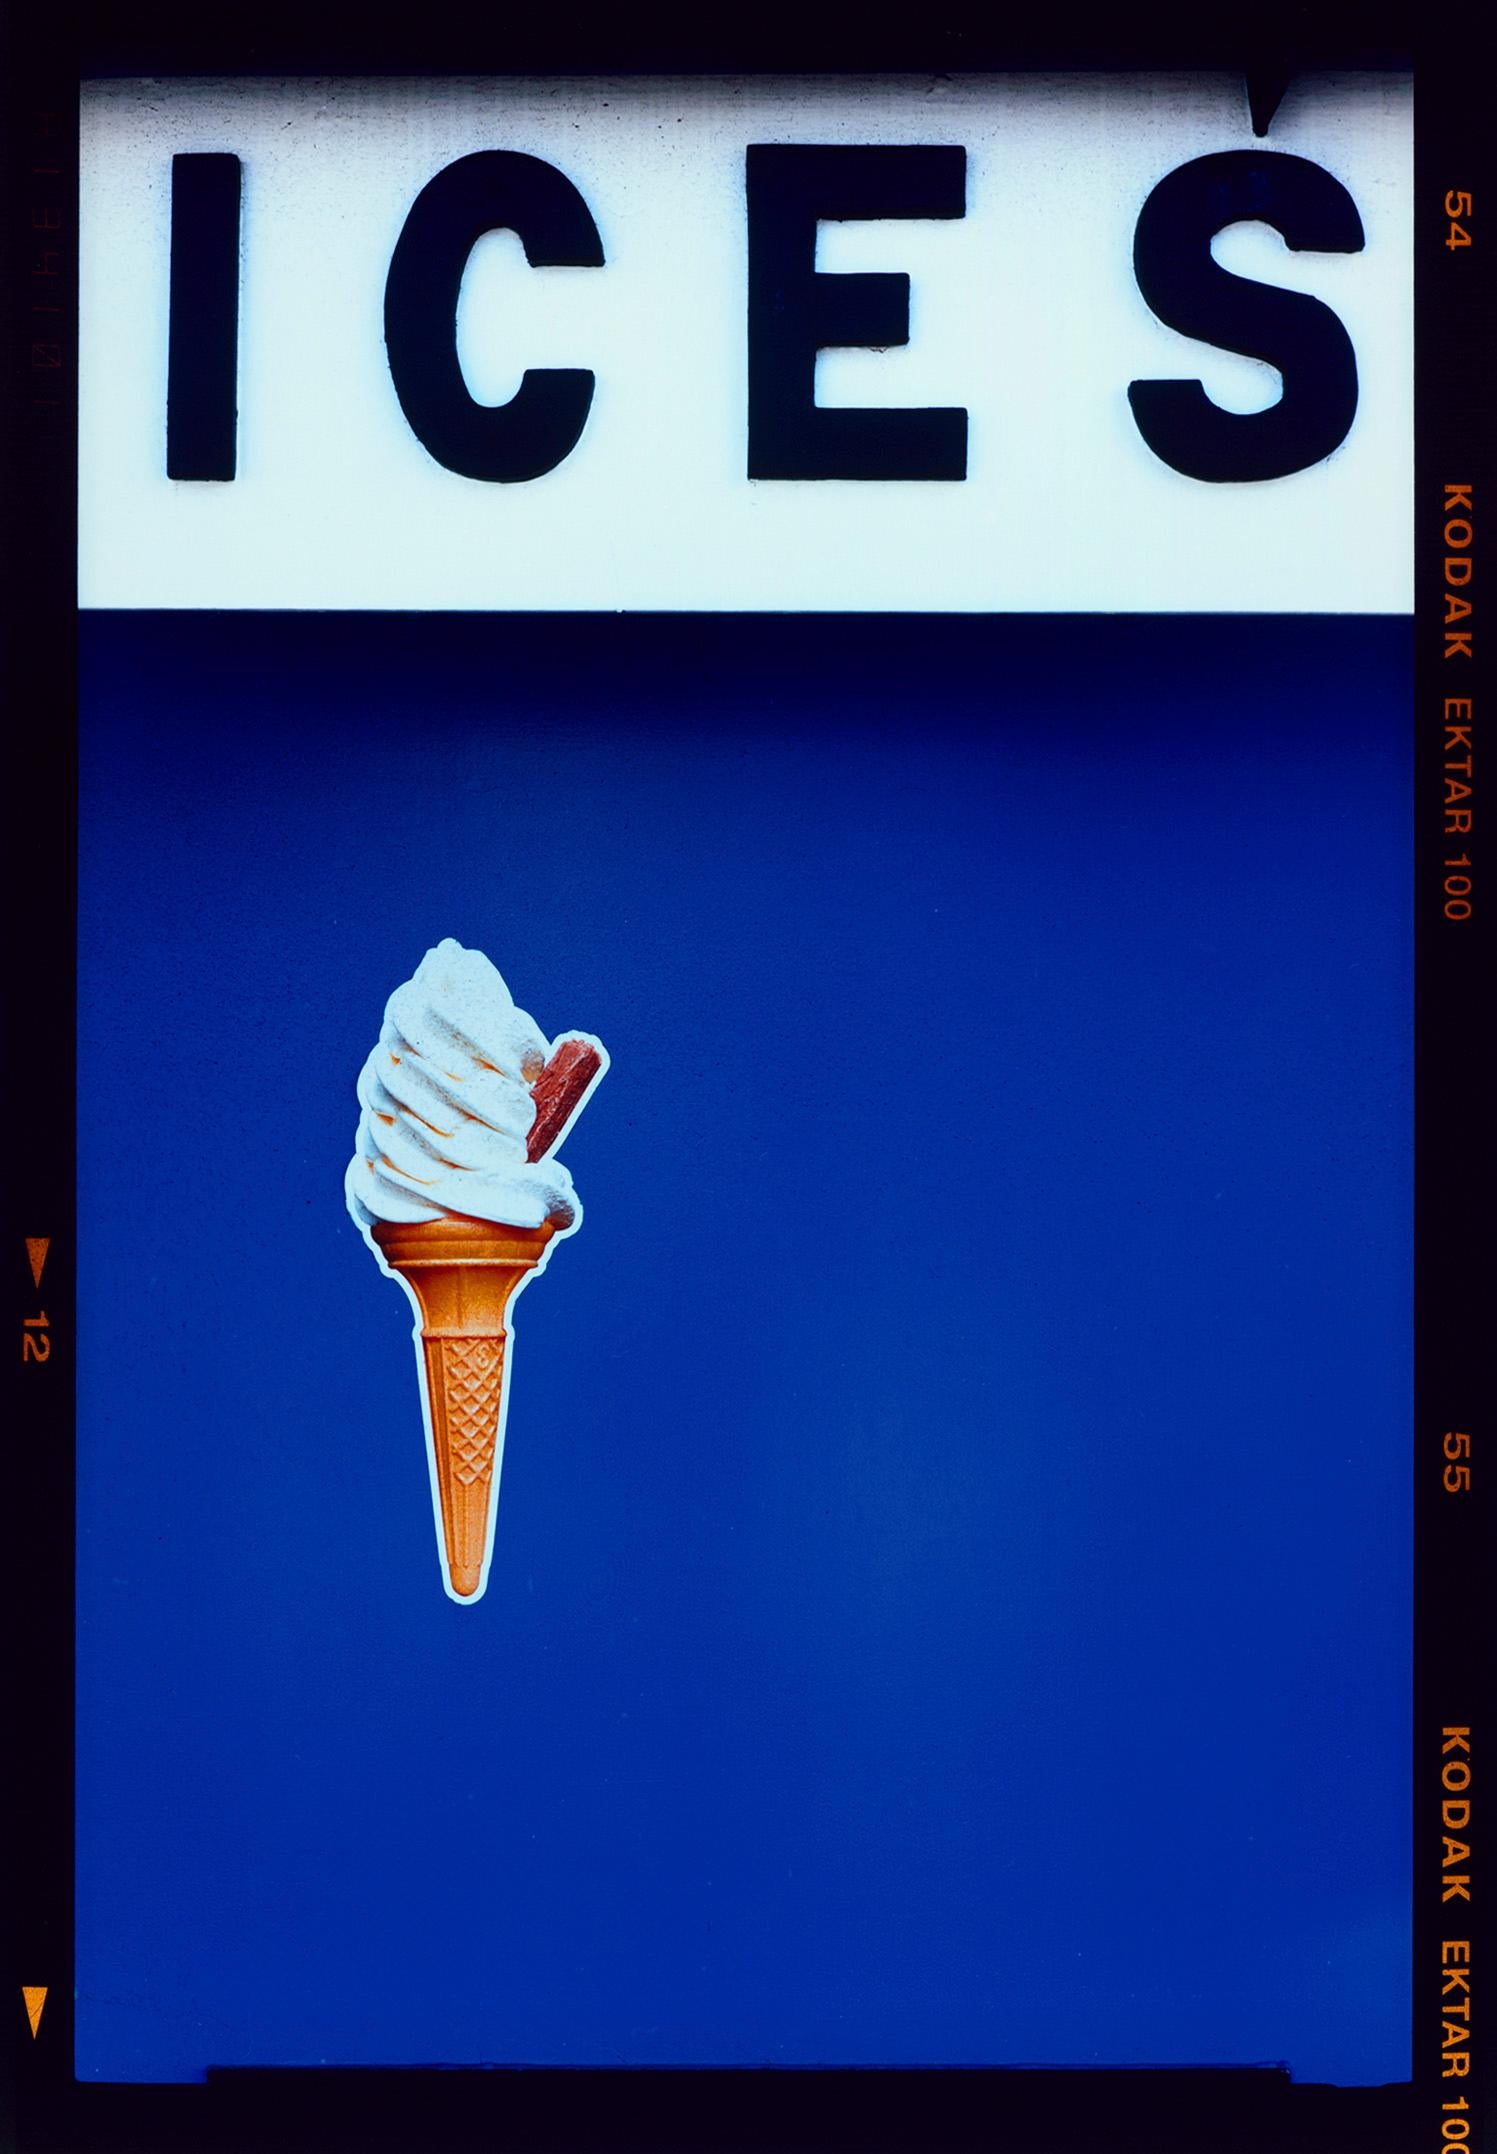 Richard Heeps Color Photograph - ICES (Blue), Bexhill-on-Sea - British seaside color photography